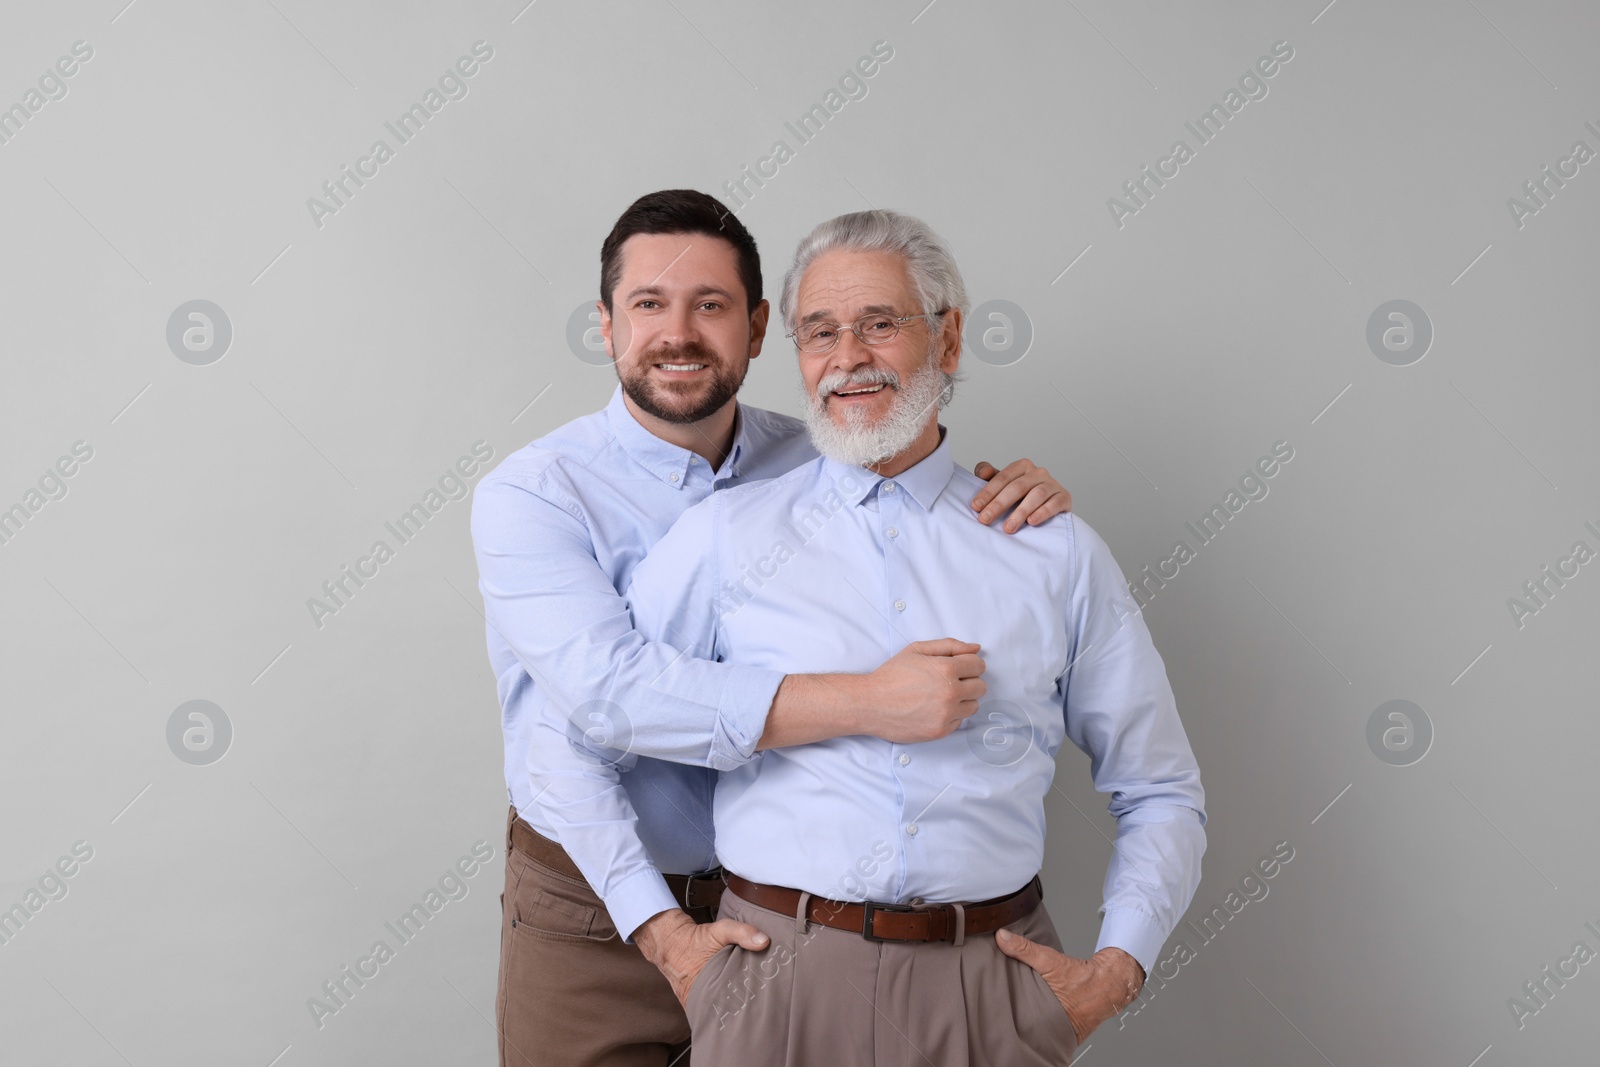 Photo of Happy son and his dad on gray background